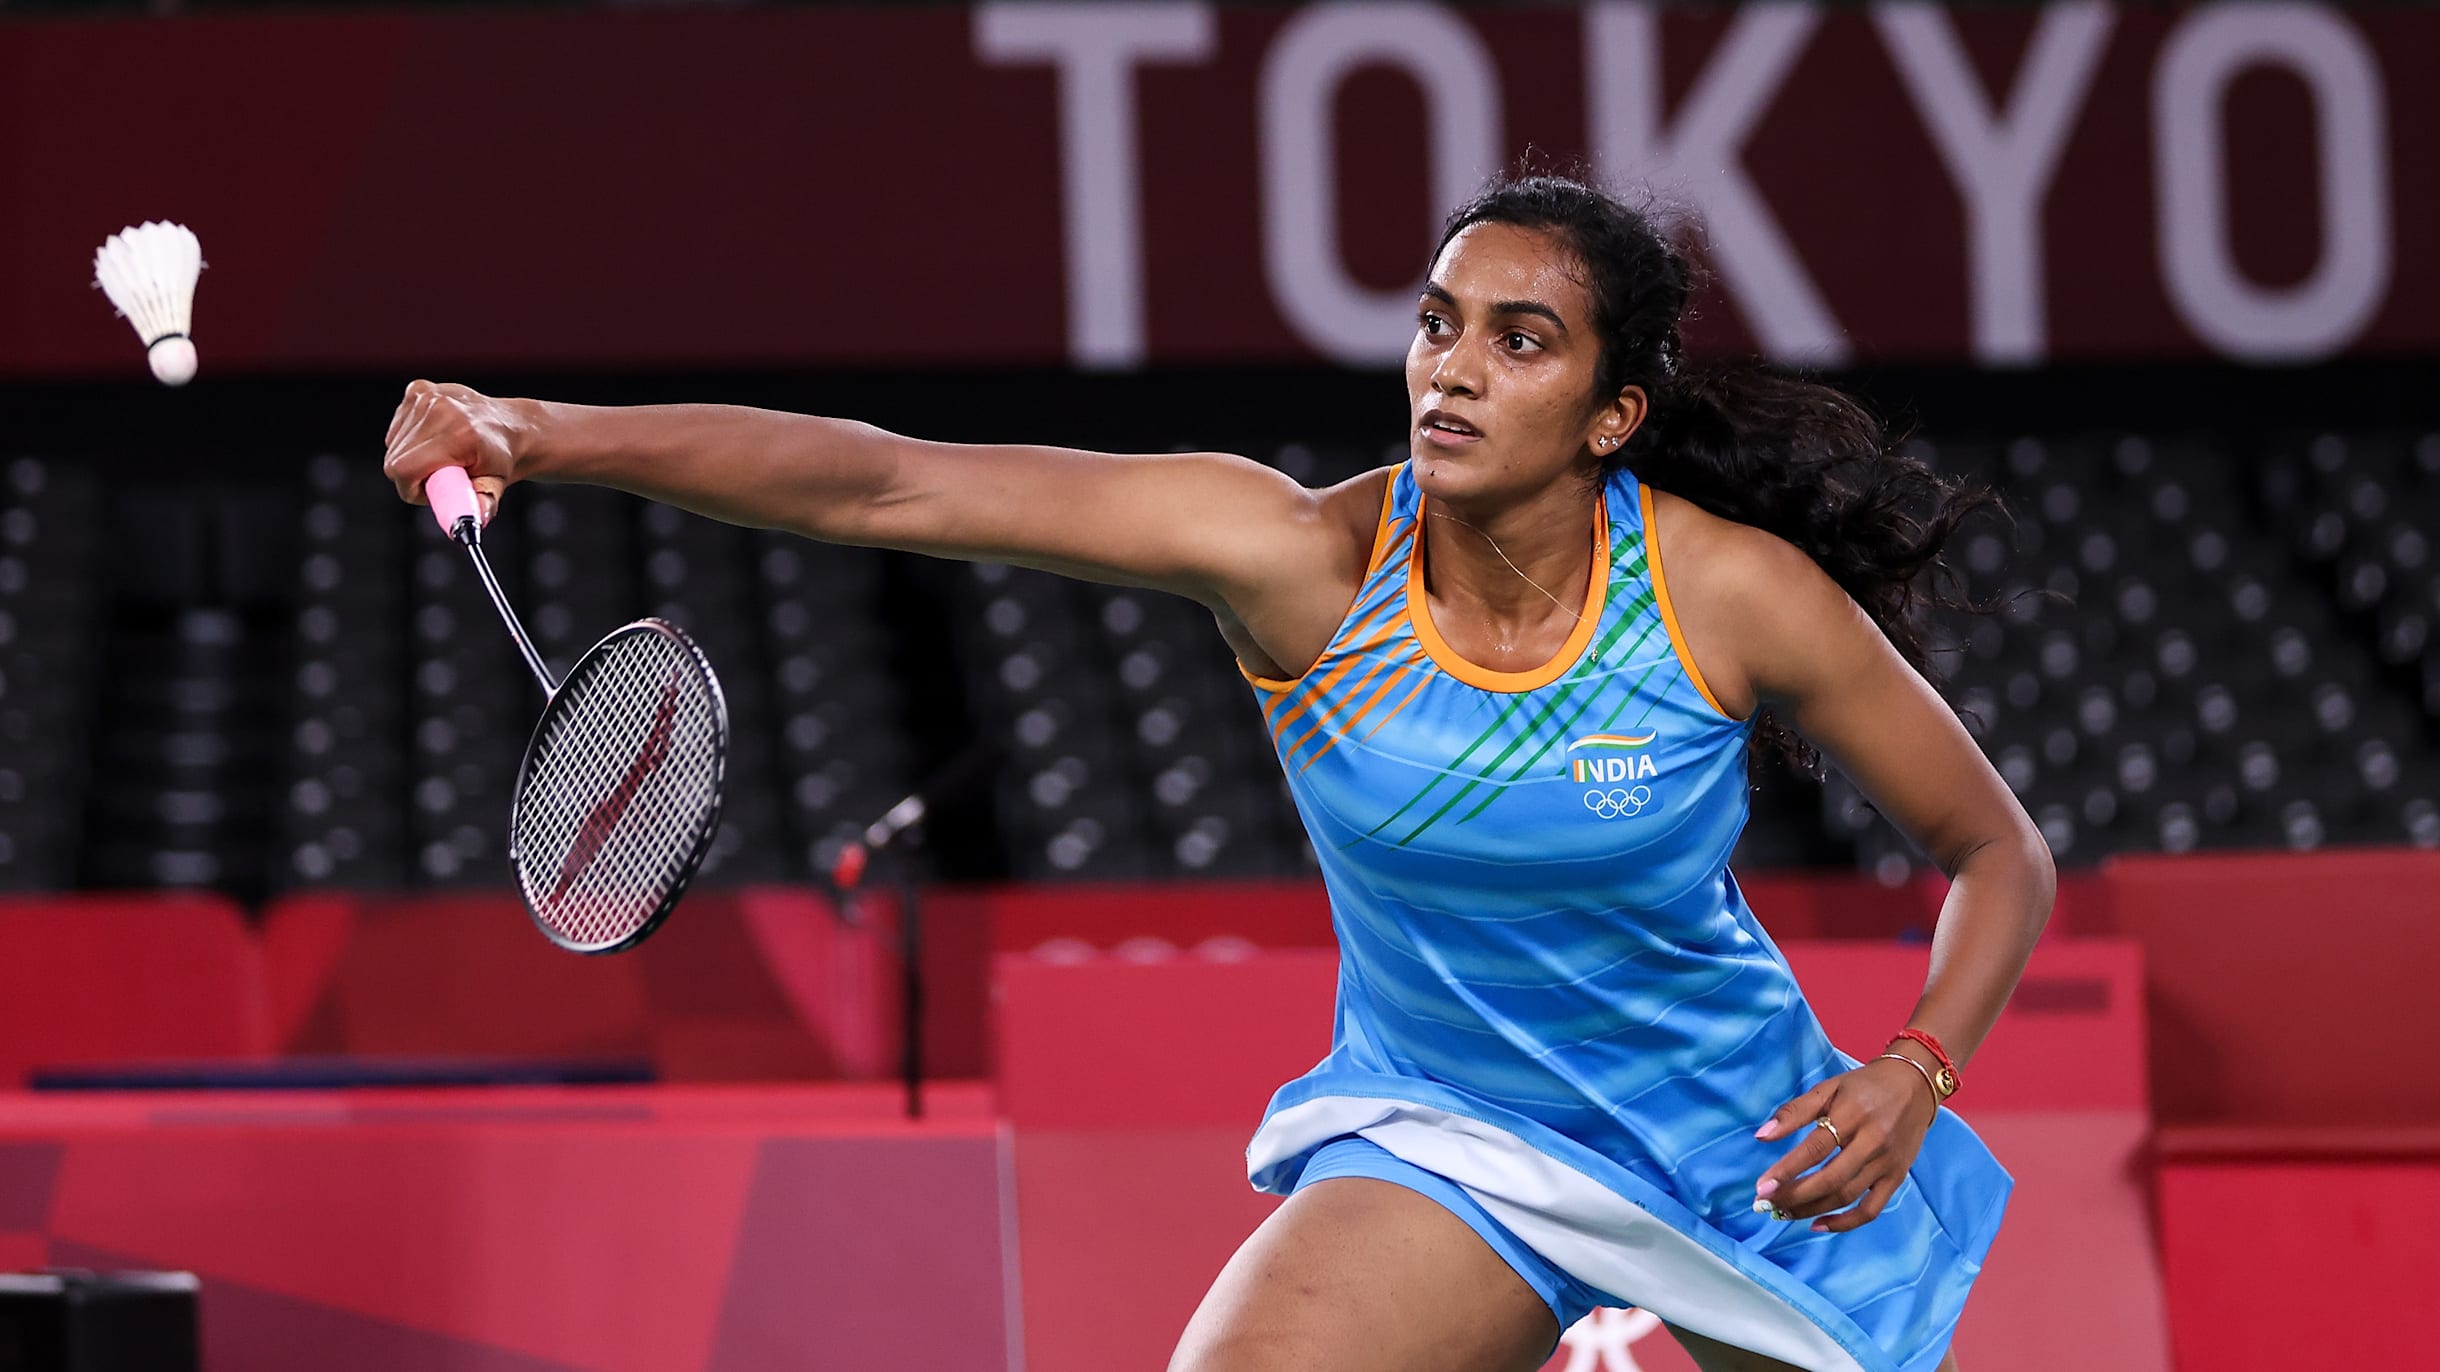 Thomas and Uber Cup 2022 Know schedule and watch live streaming and telecast in India